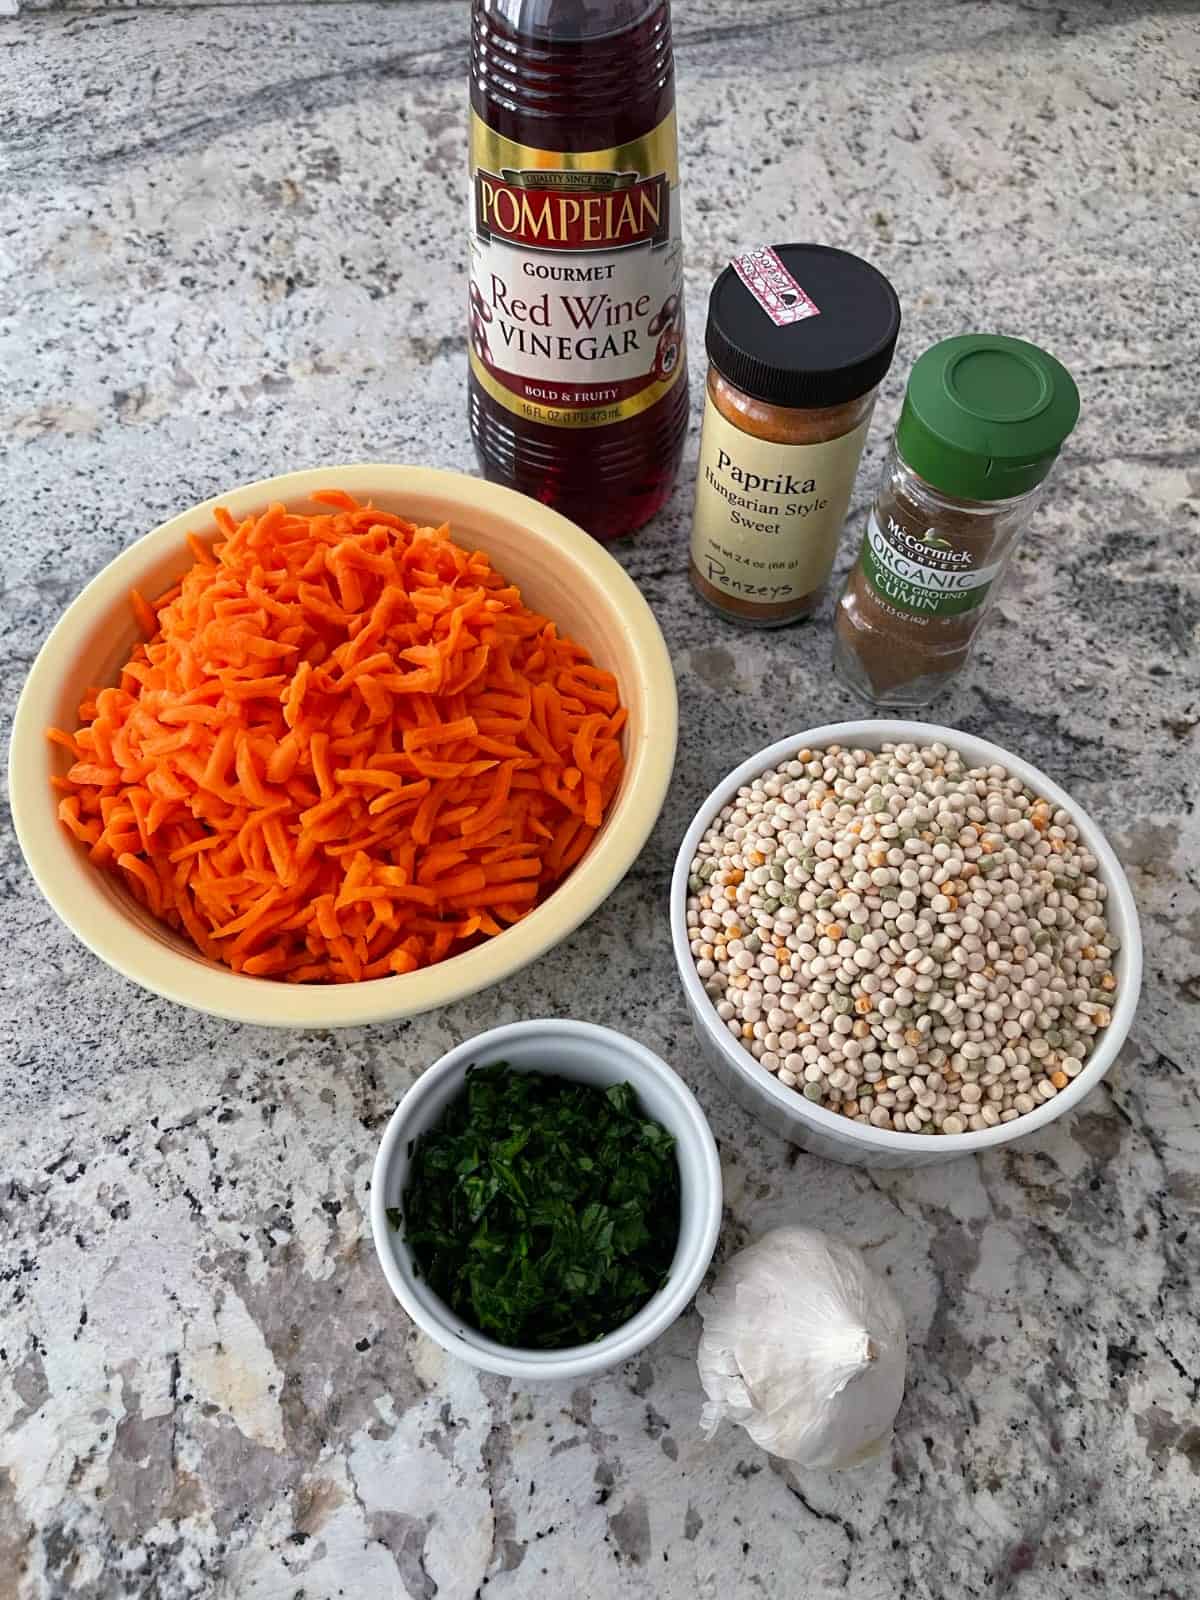 Ingredients including Israeli couscous, shredded carrots, chopped parsley, paprika, cumin and red wine vinegar.